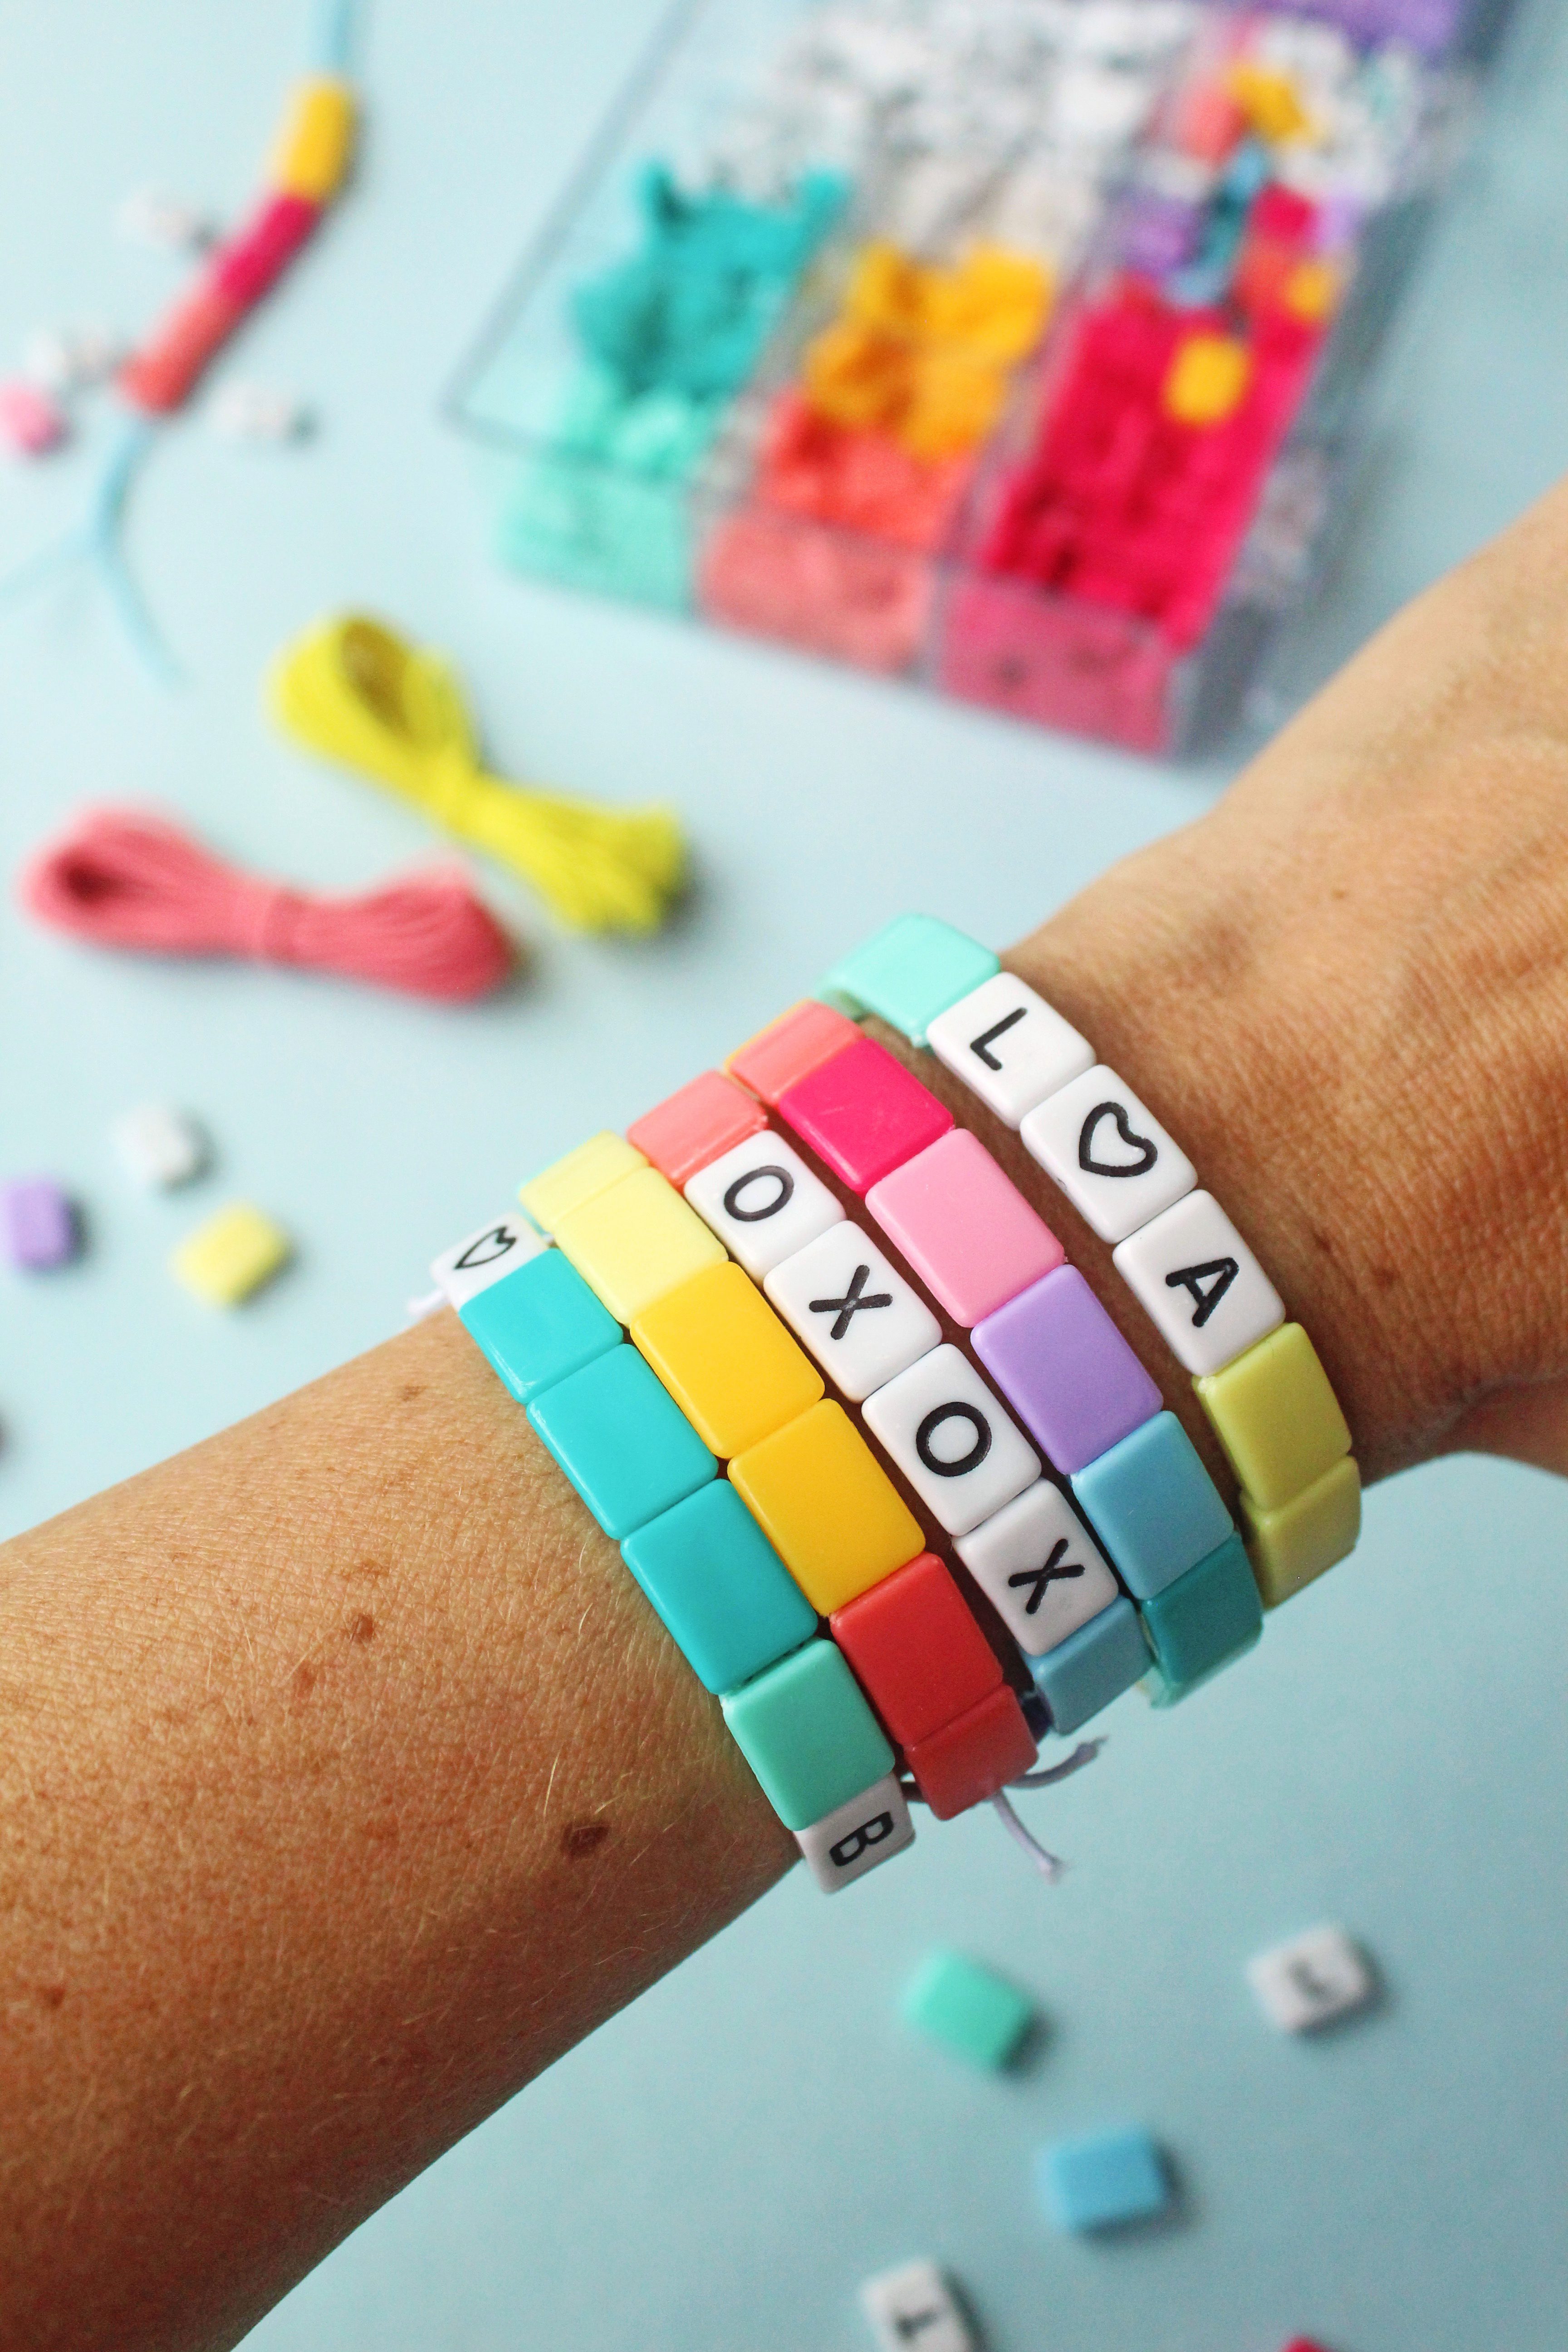 DIY Tile Bead Bracelets + a tutorial featured by Top US Craft Blog + The Pretty Life Girls